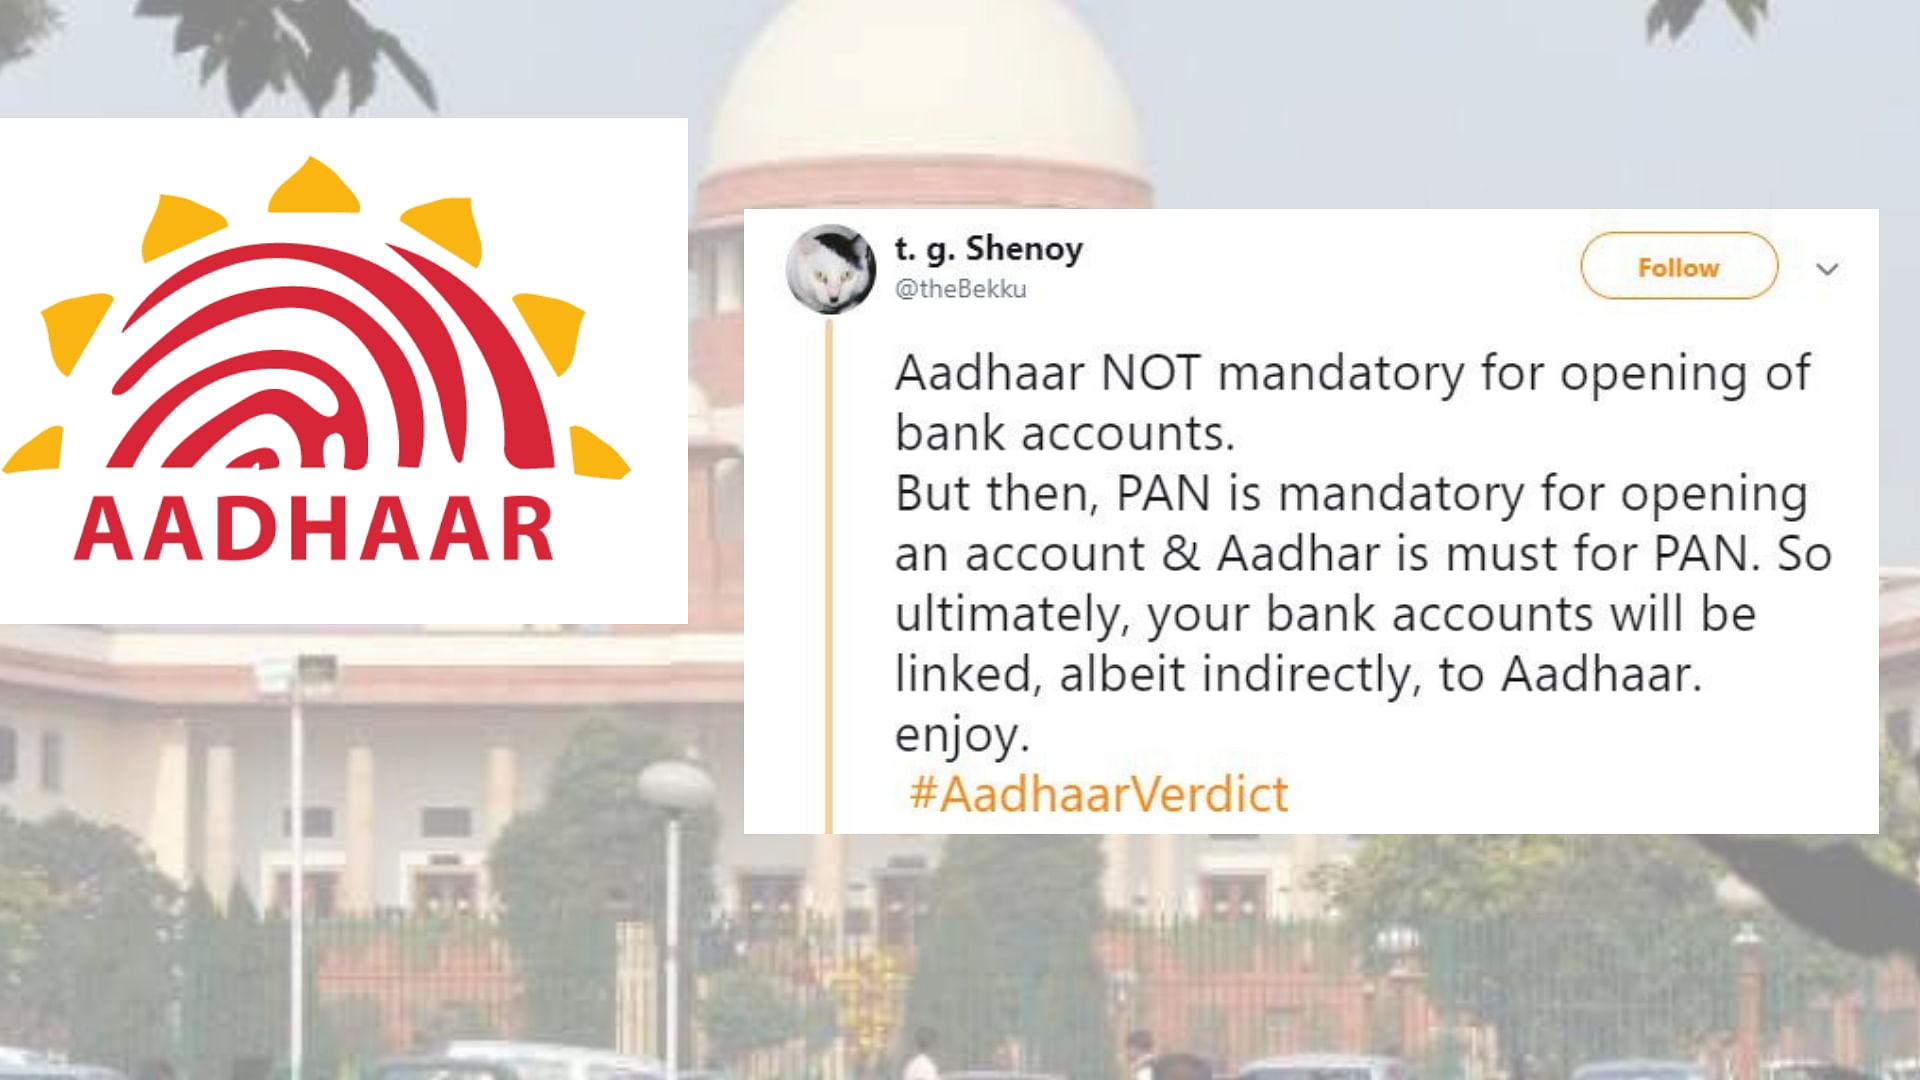 The majority judgment struck down the linking of mobile numbers and bank accounts to Aadhaar, but it will still be required to get a PAN card and to file I-T returns.